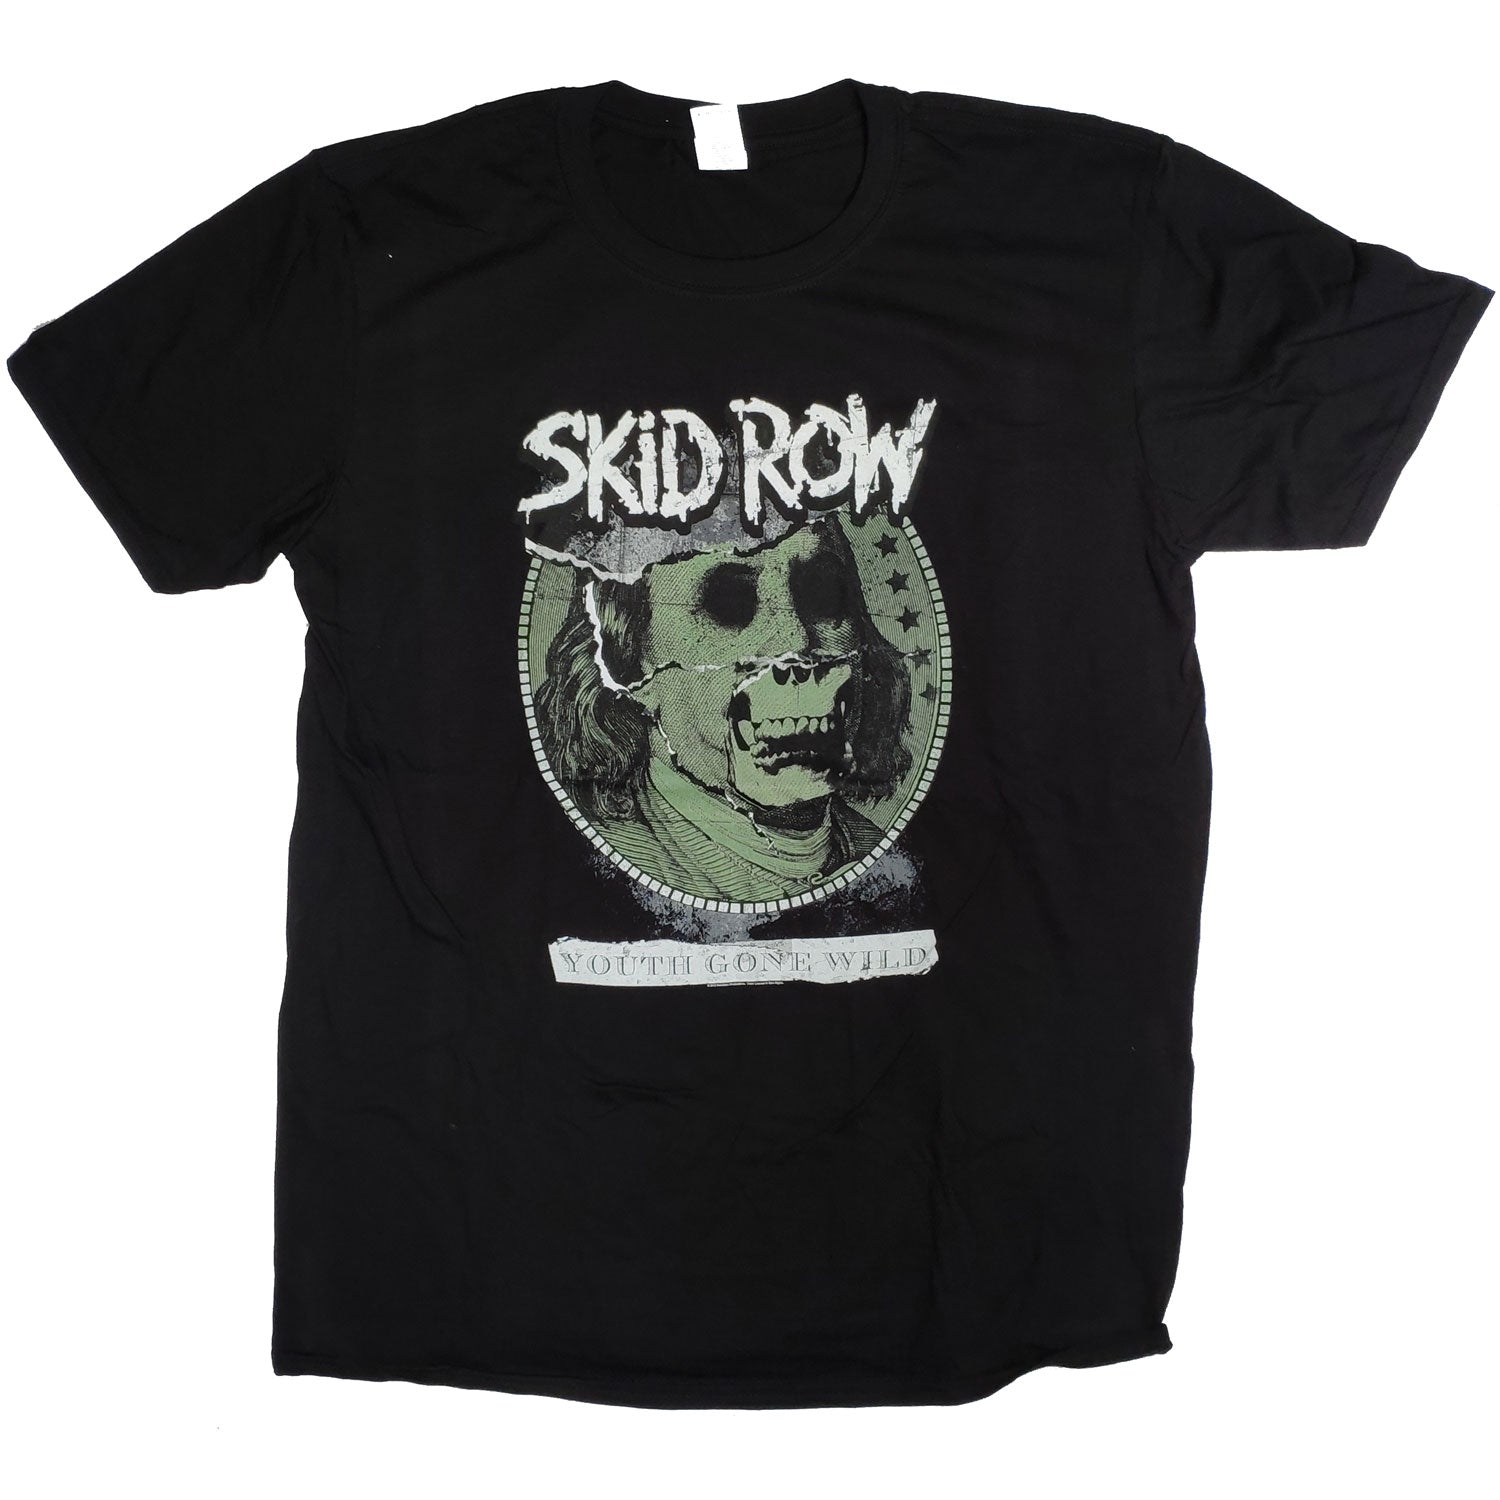 Skid Row T Shirt - Youth Gone Wild 100% Official